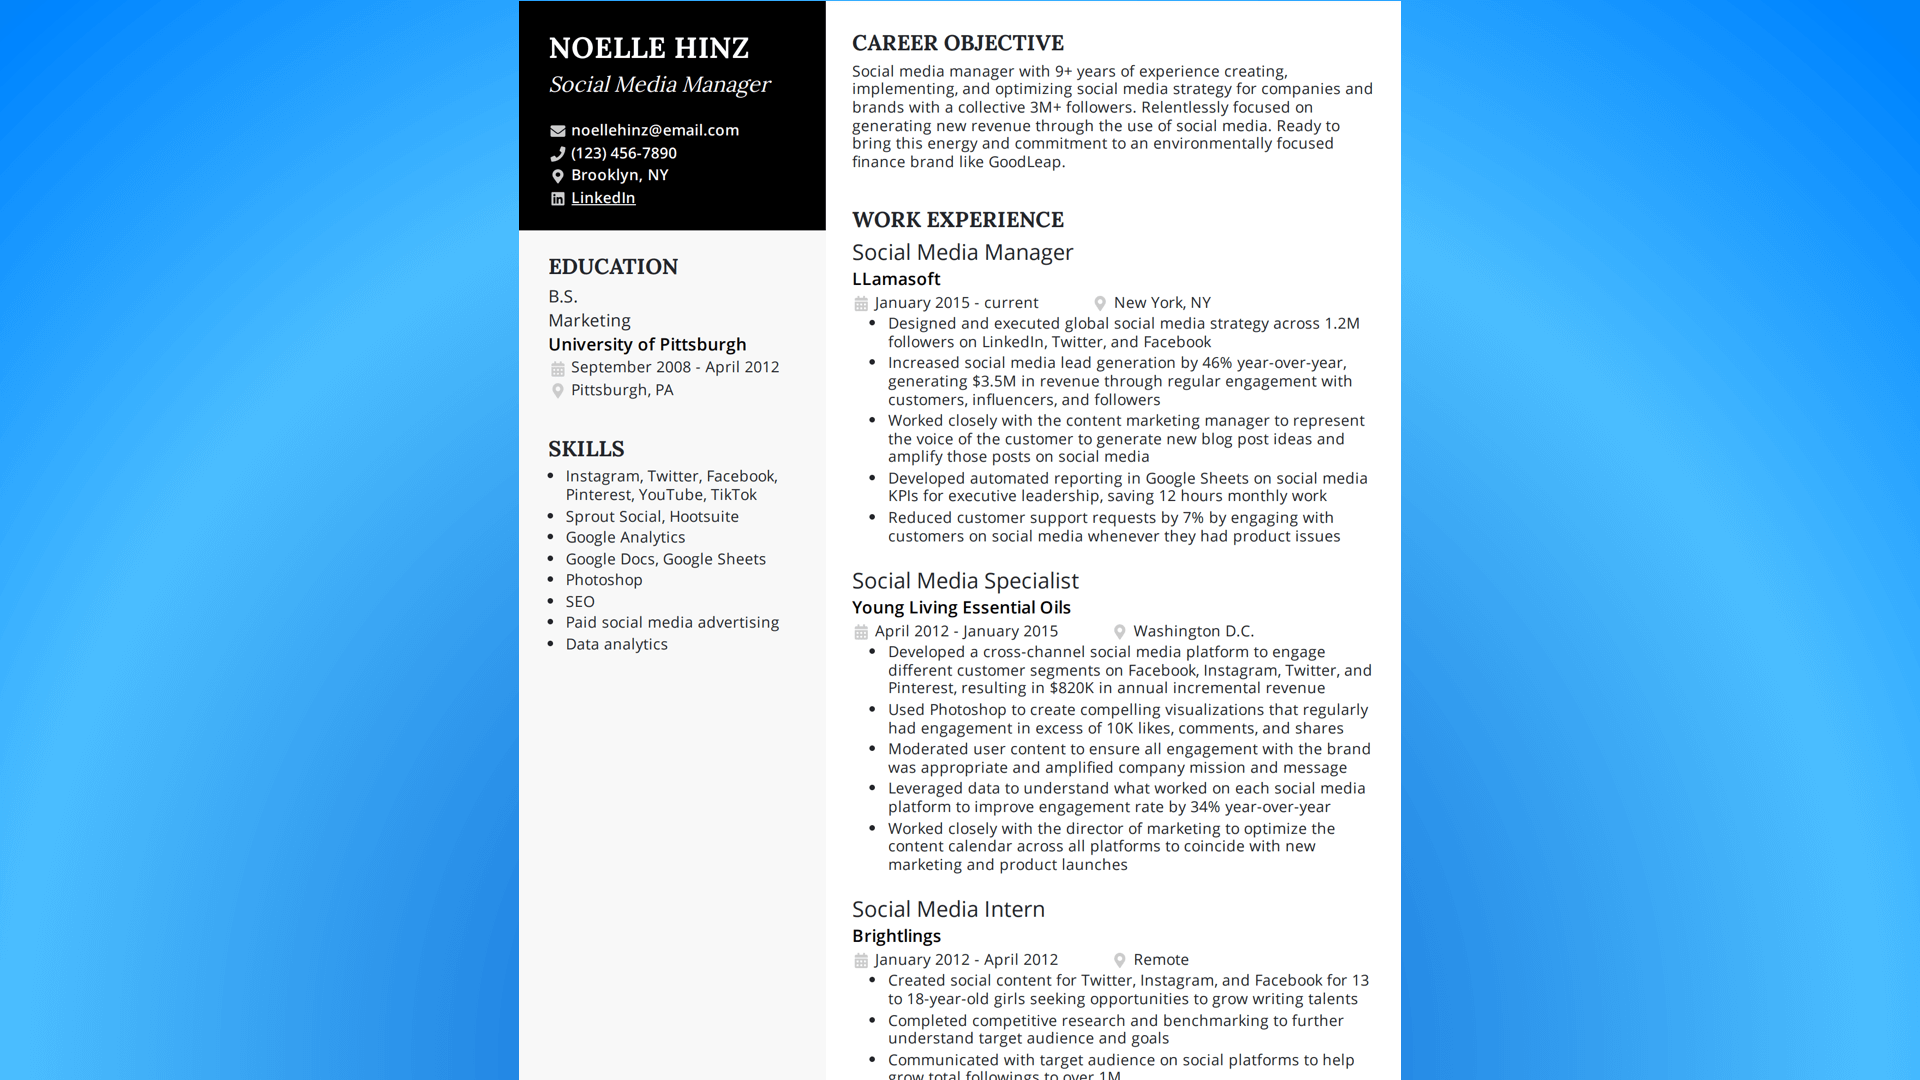 Single-page monotone resume from BeamJobs.